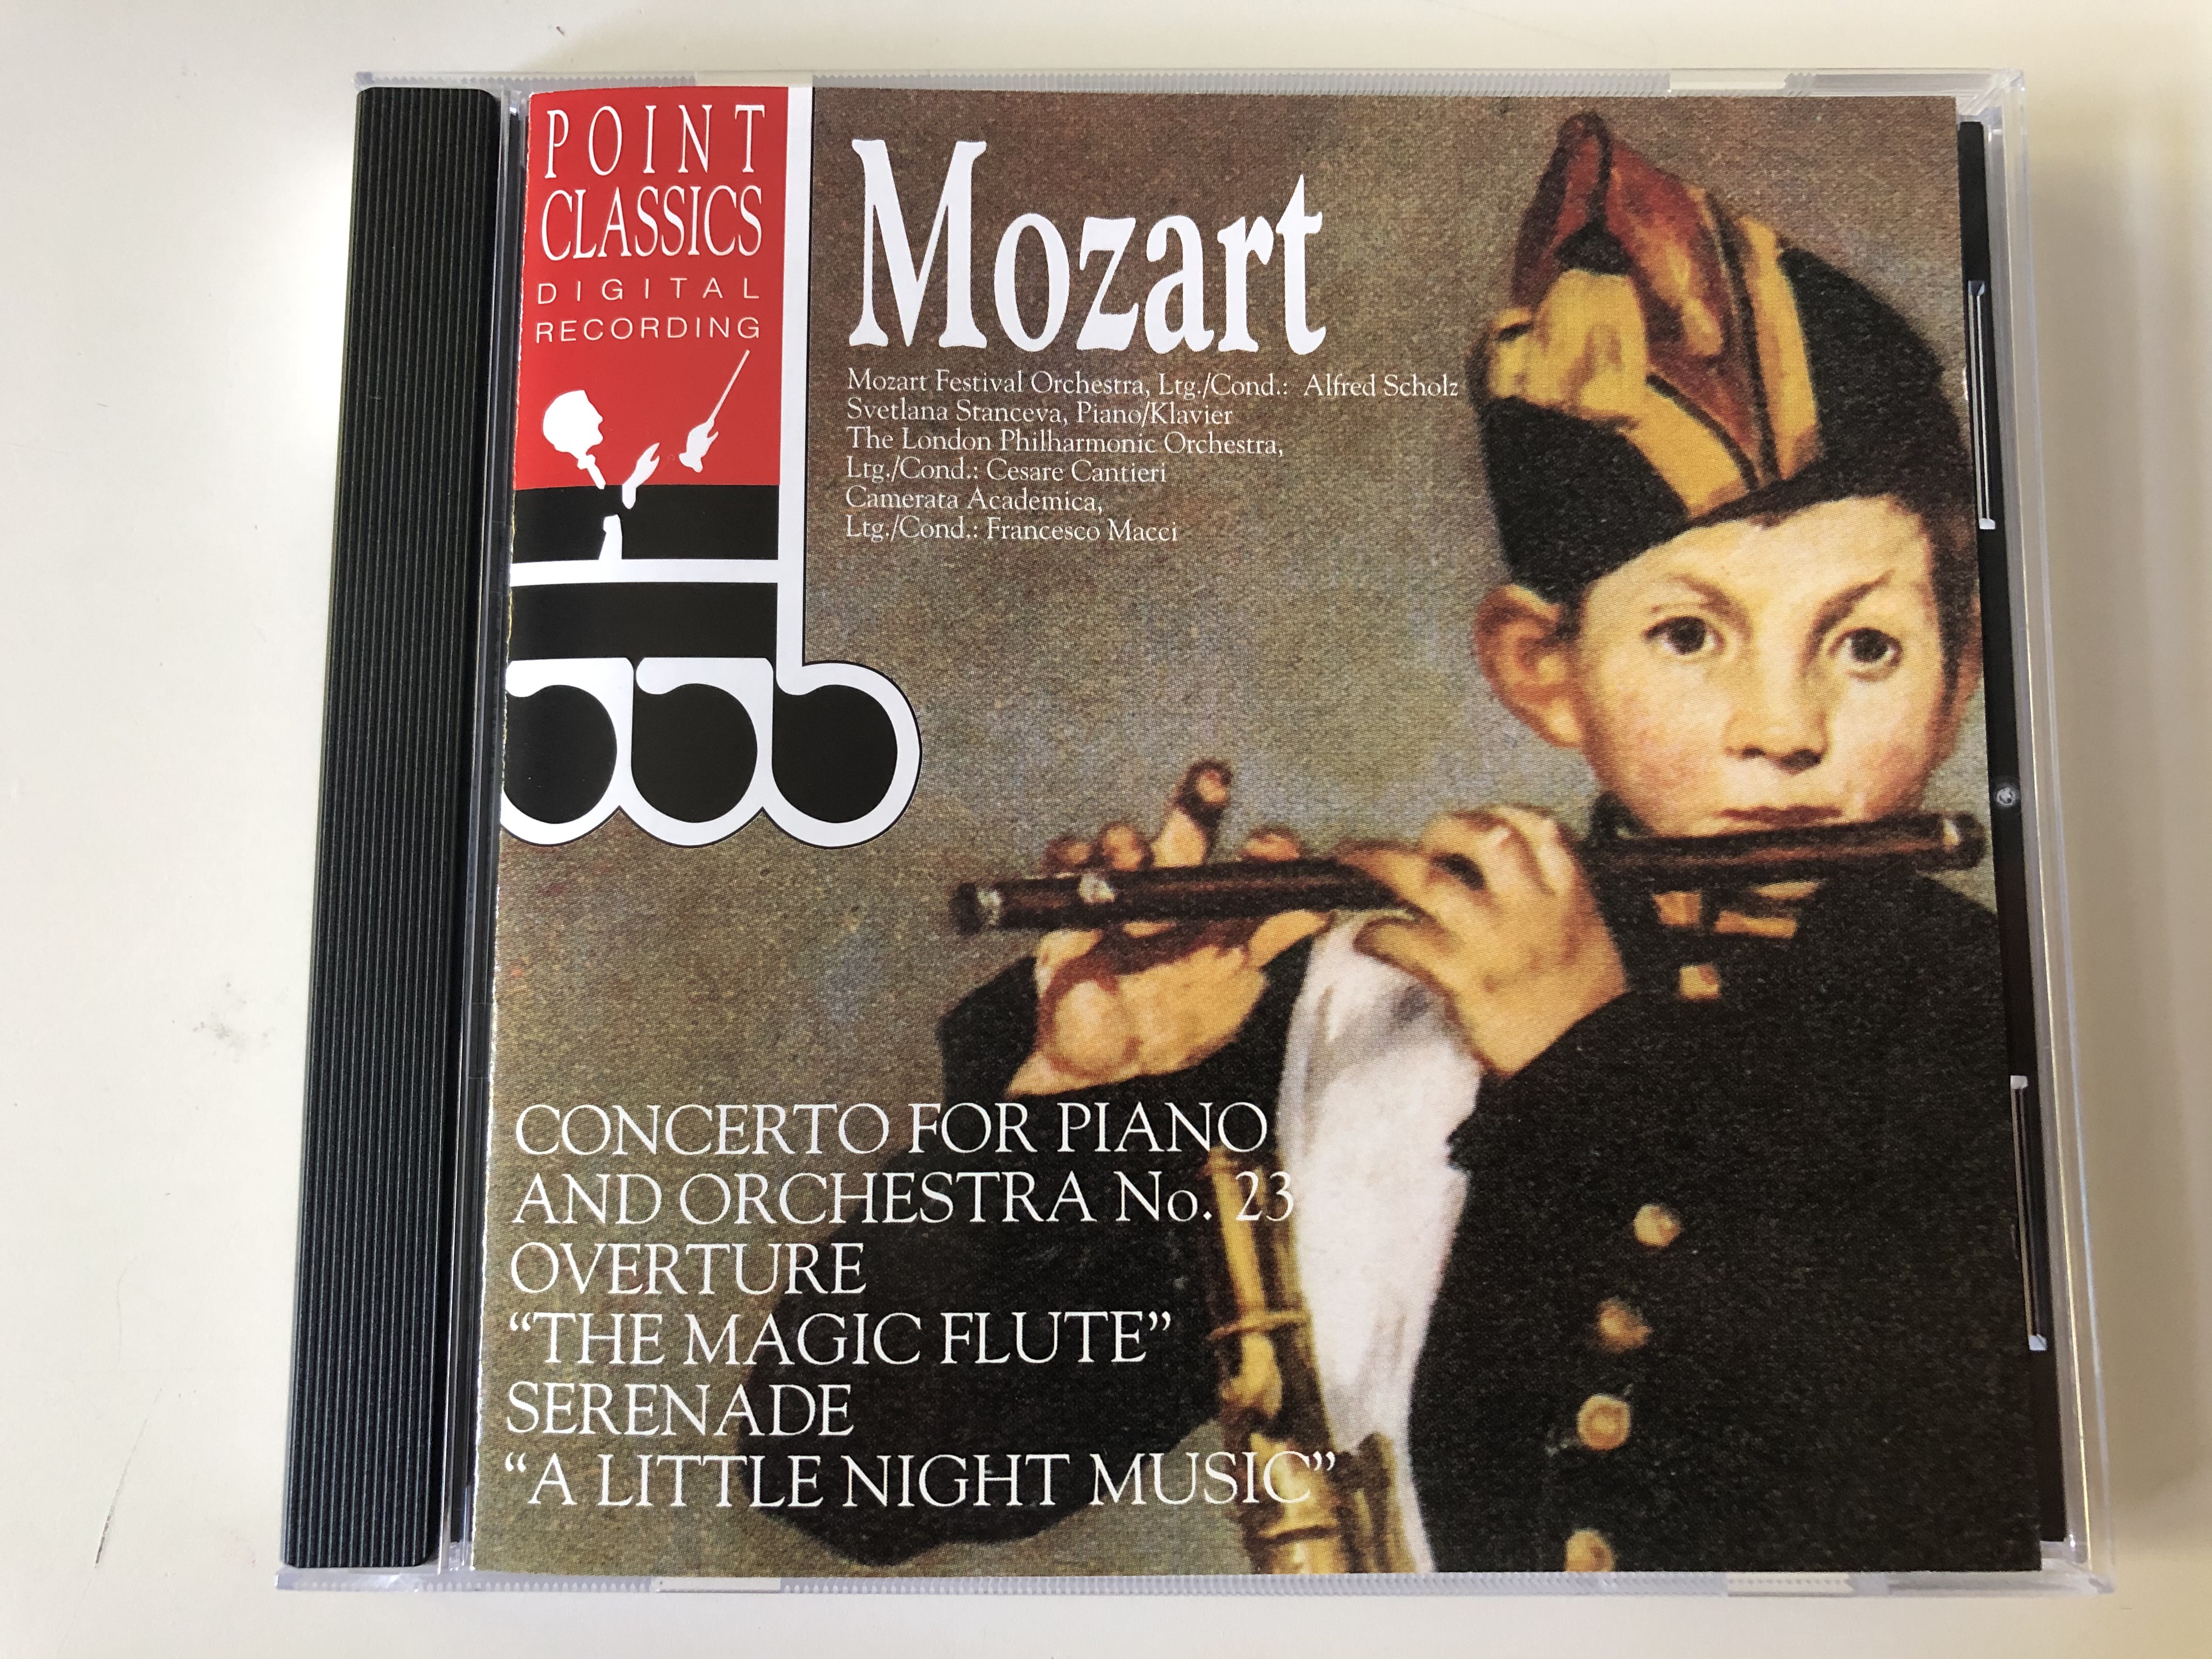 mozart-concerto-for-piano-and-orchestra-no.-23-overture-the-magic-flute-serenade-a-little-night-music-point-classics-audio-cd-1994-2671202-1-.jpg